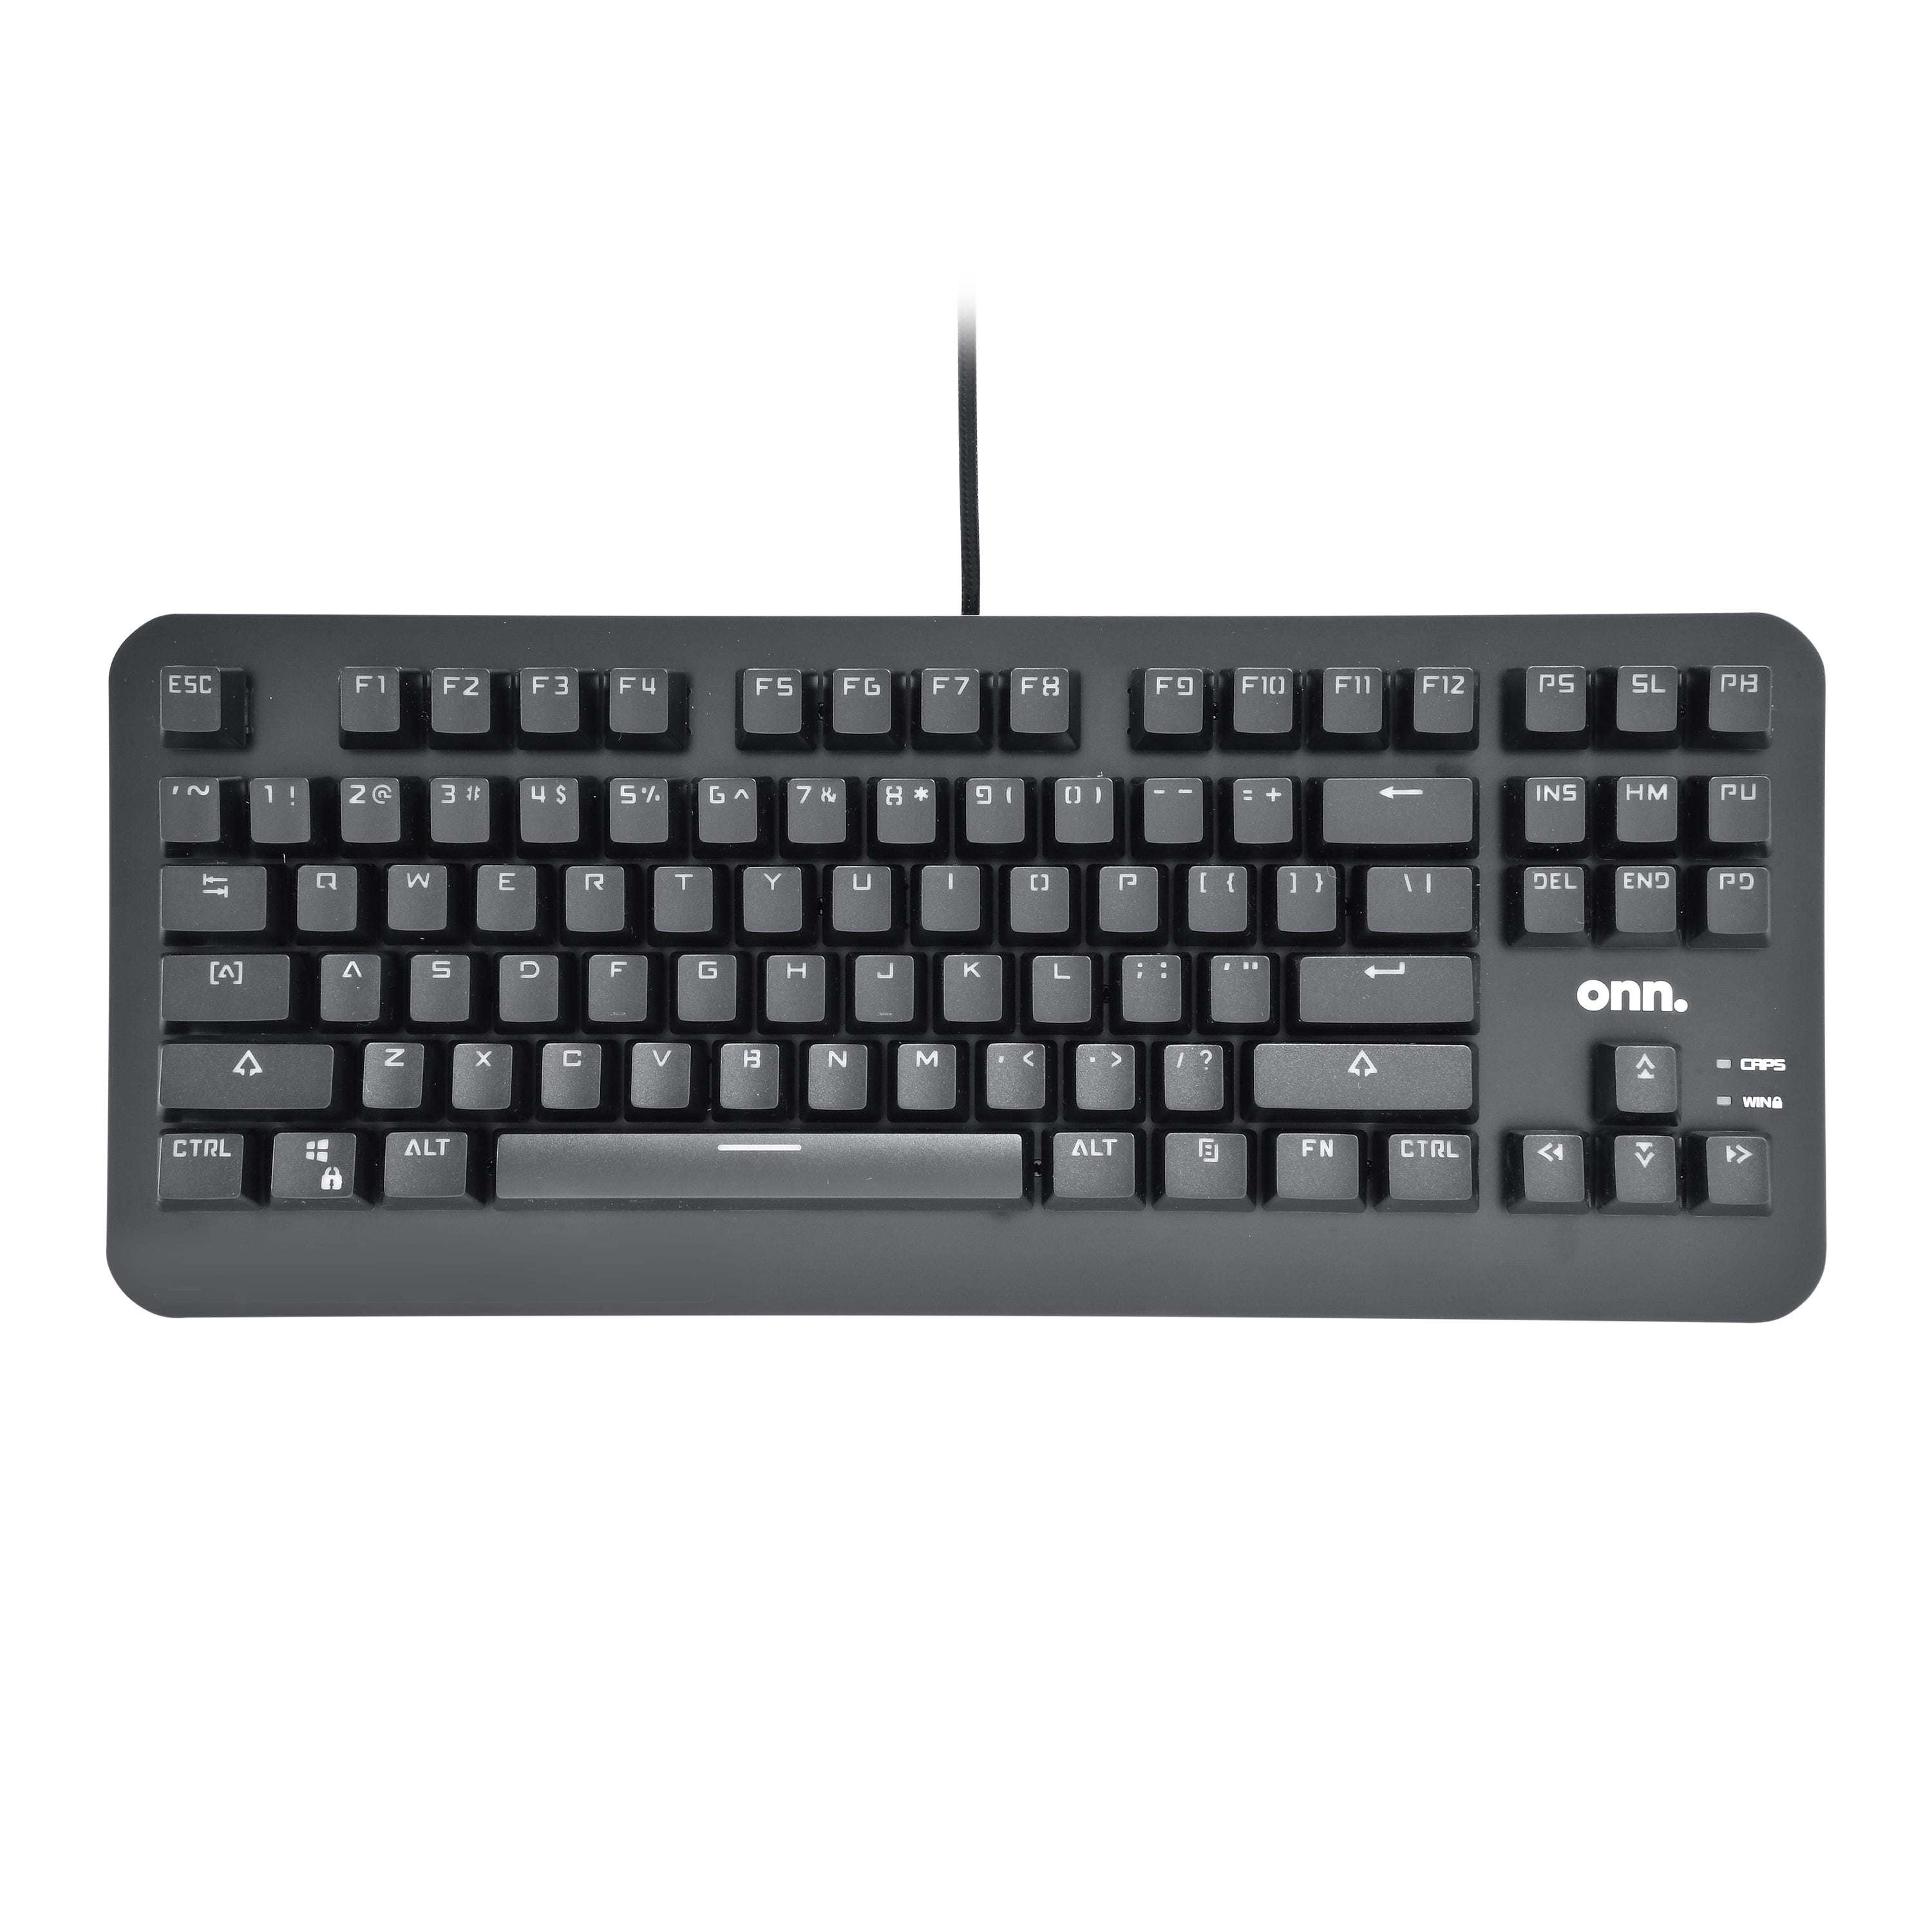 onn. RGB Mechanical Gaming Keyboard with Compact Tenkeyless Design, Blue Switches, 6ft USB Cable, Black